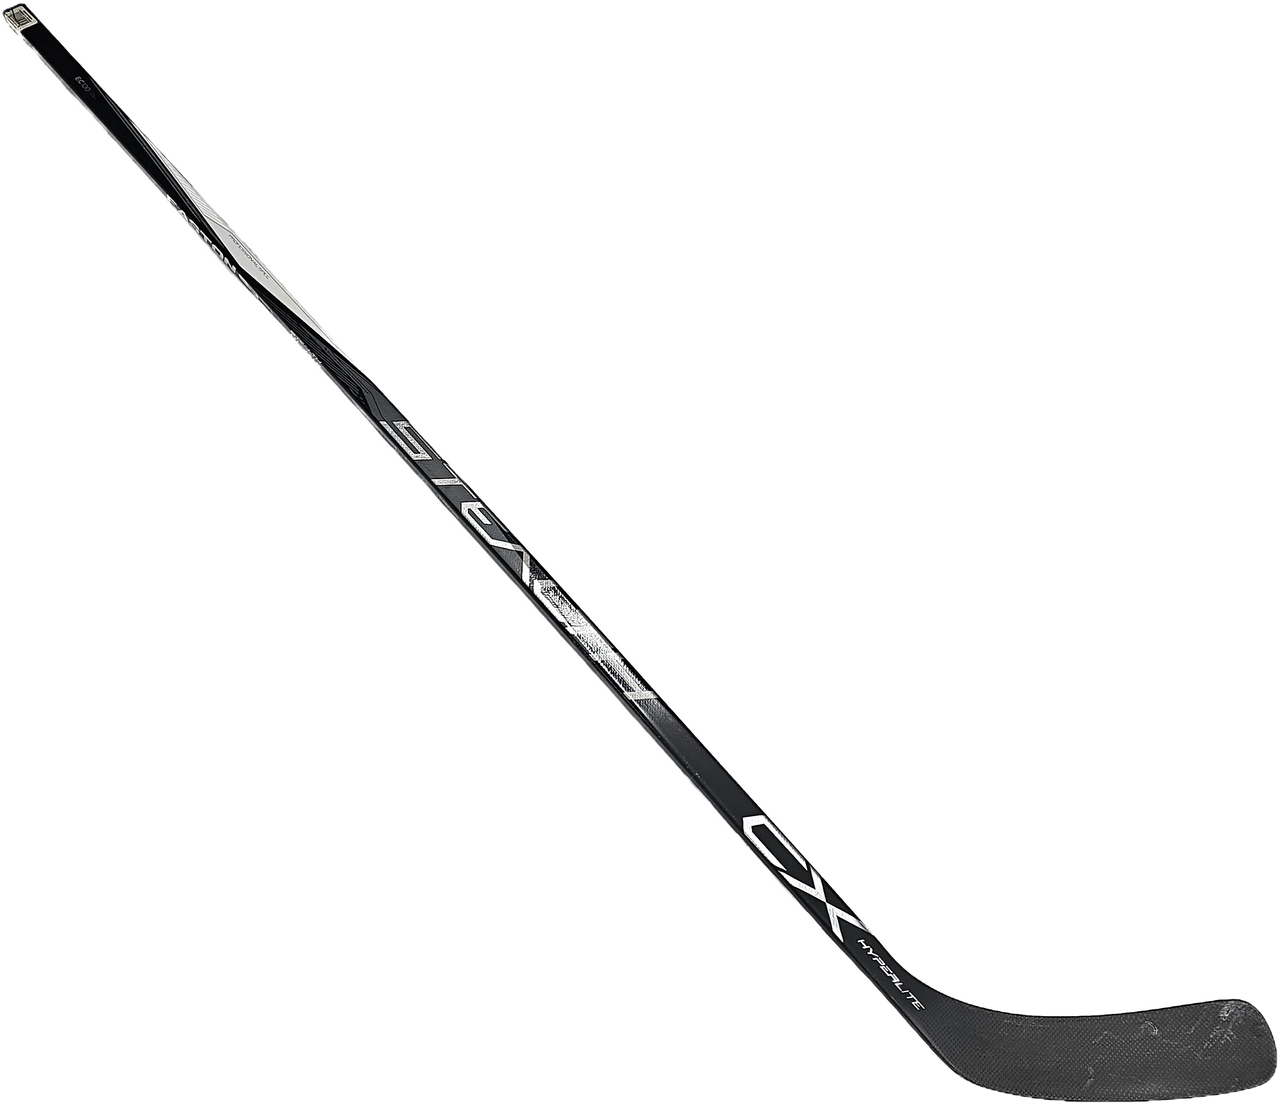 Which NHL Player Has The Craziest Curve? - Pro Stock Hockey